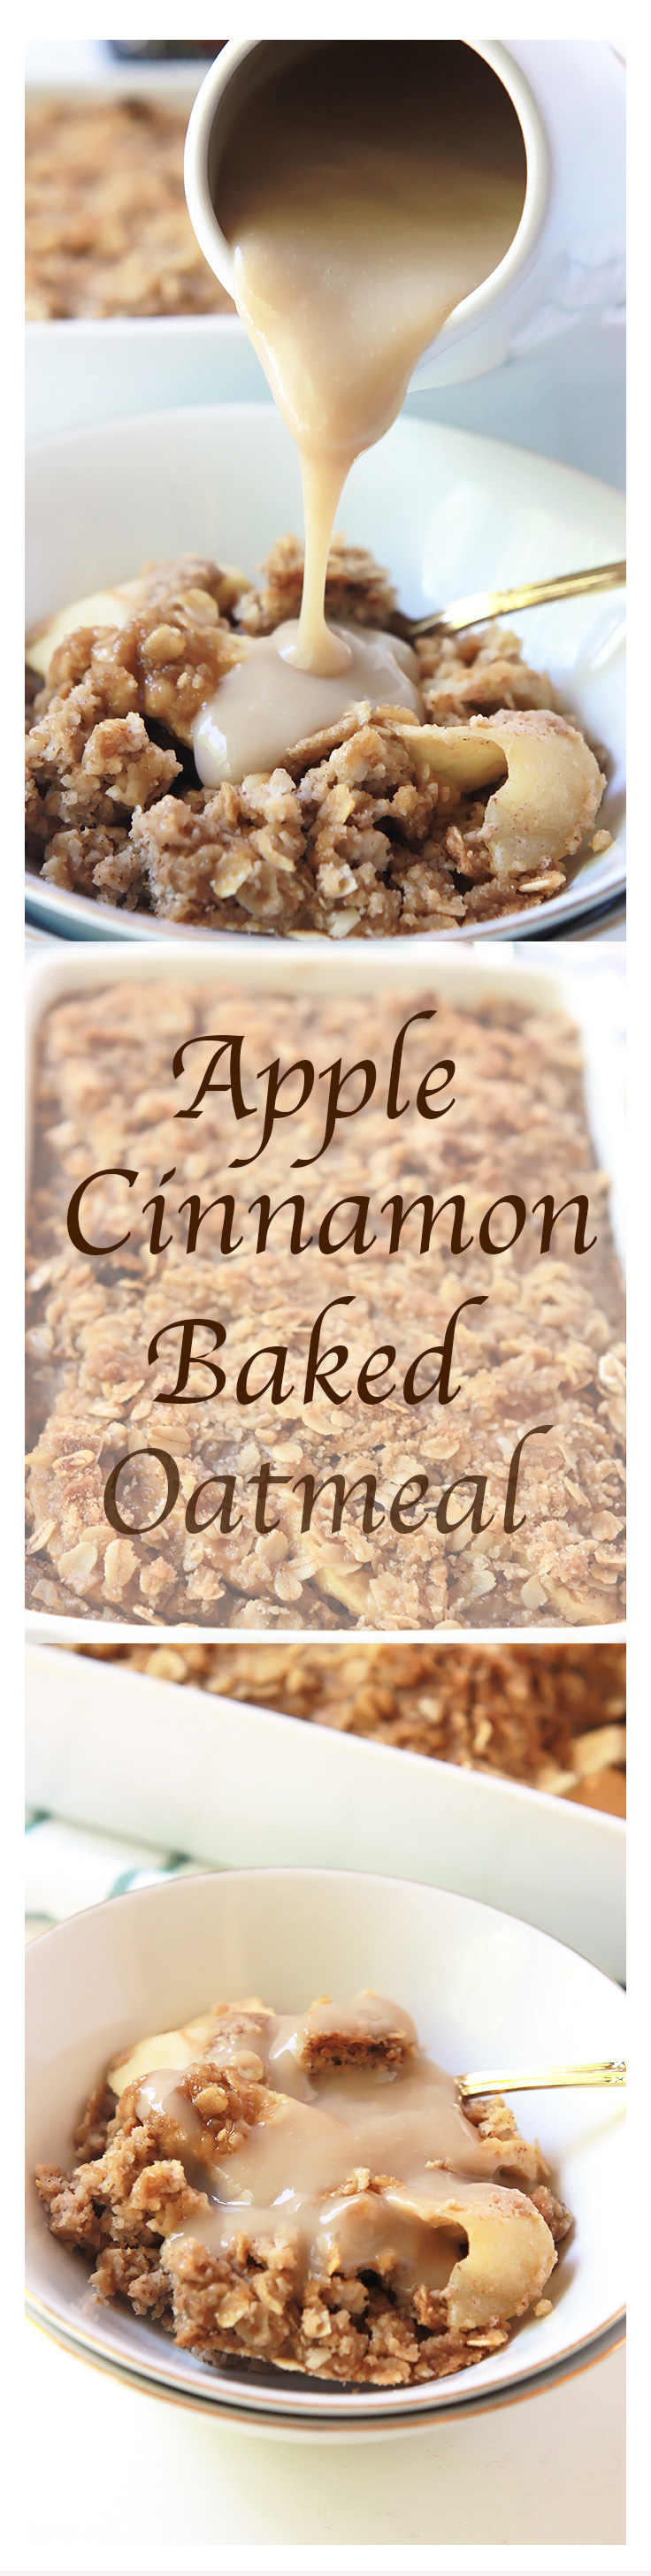 Apples, cinnamon and brown sugar! Flavors that filled my favorite childhood breakfast, stove-top oatmeal. Today these same flavors are part of my favorite make ahead breakfast, Apple Cinnamon Baked Oatmeal. 